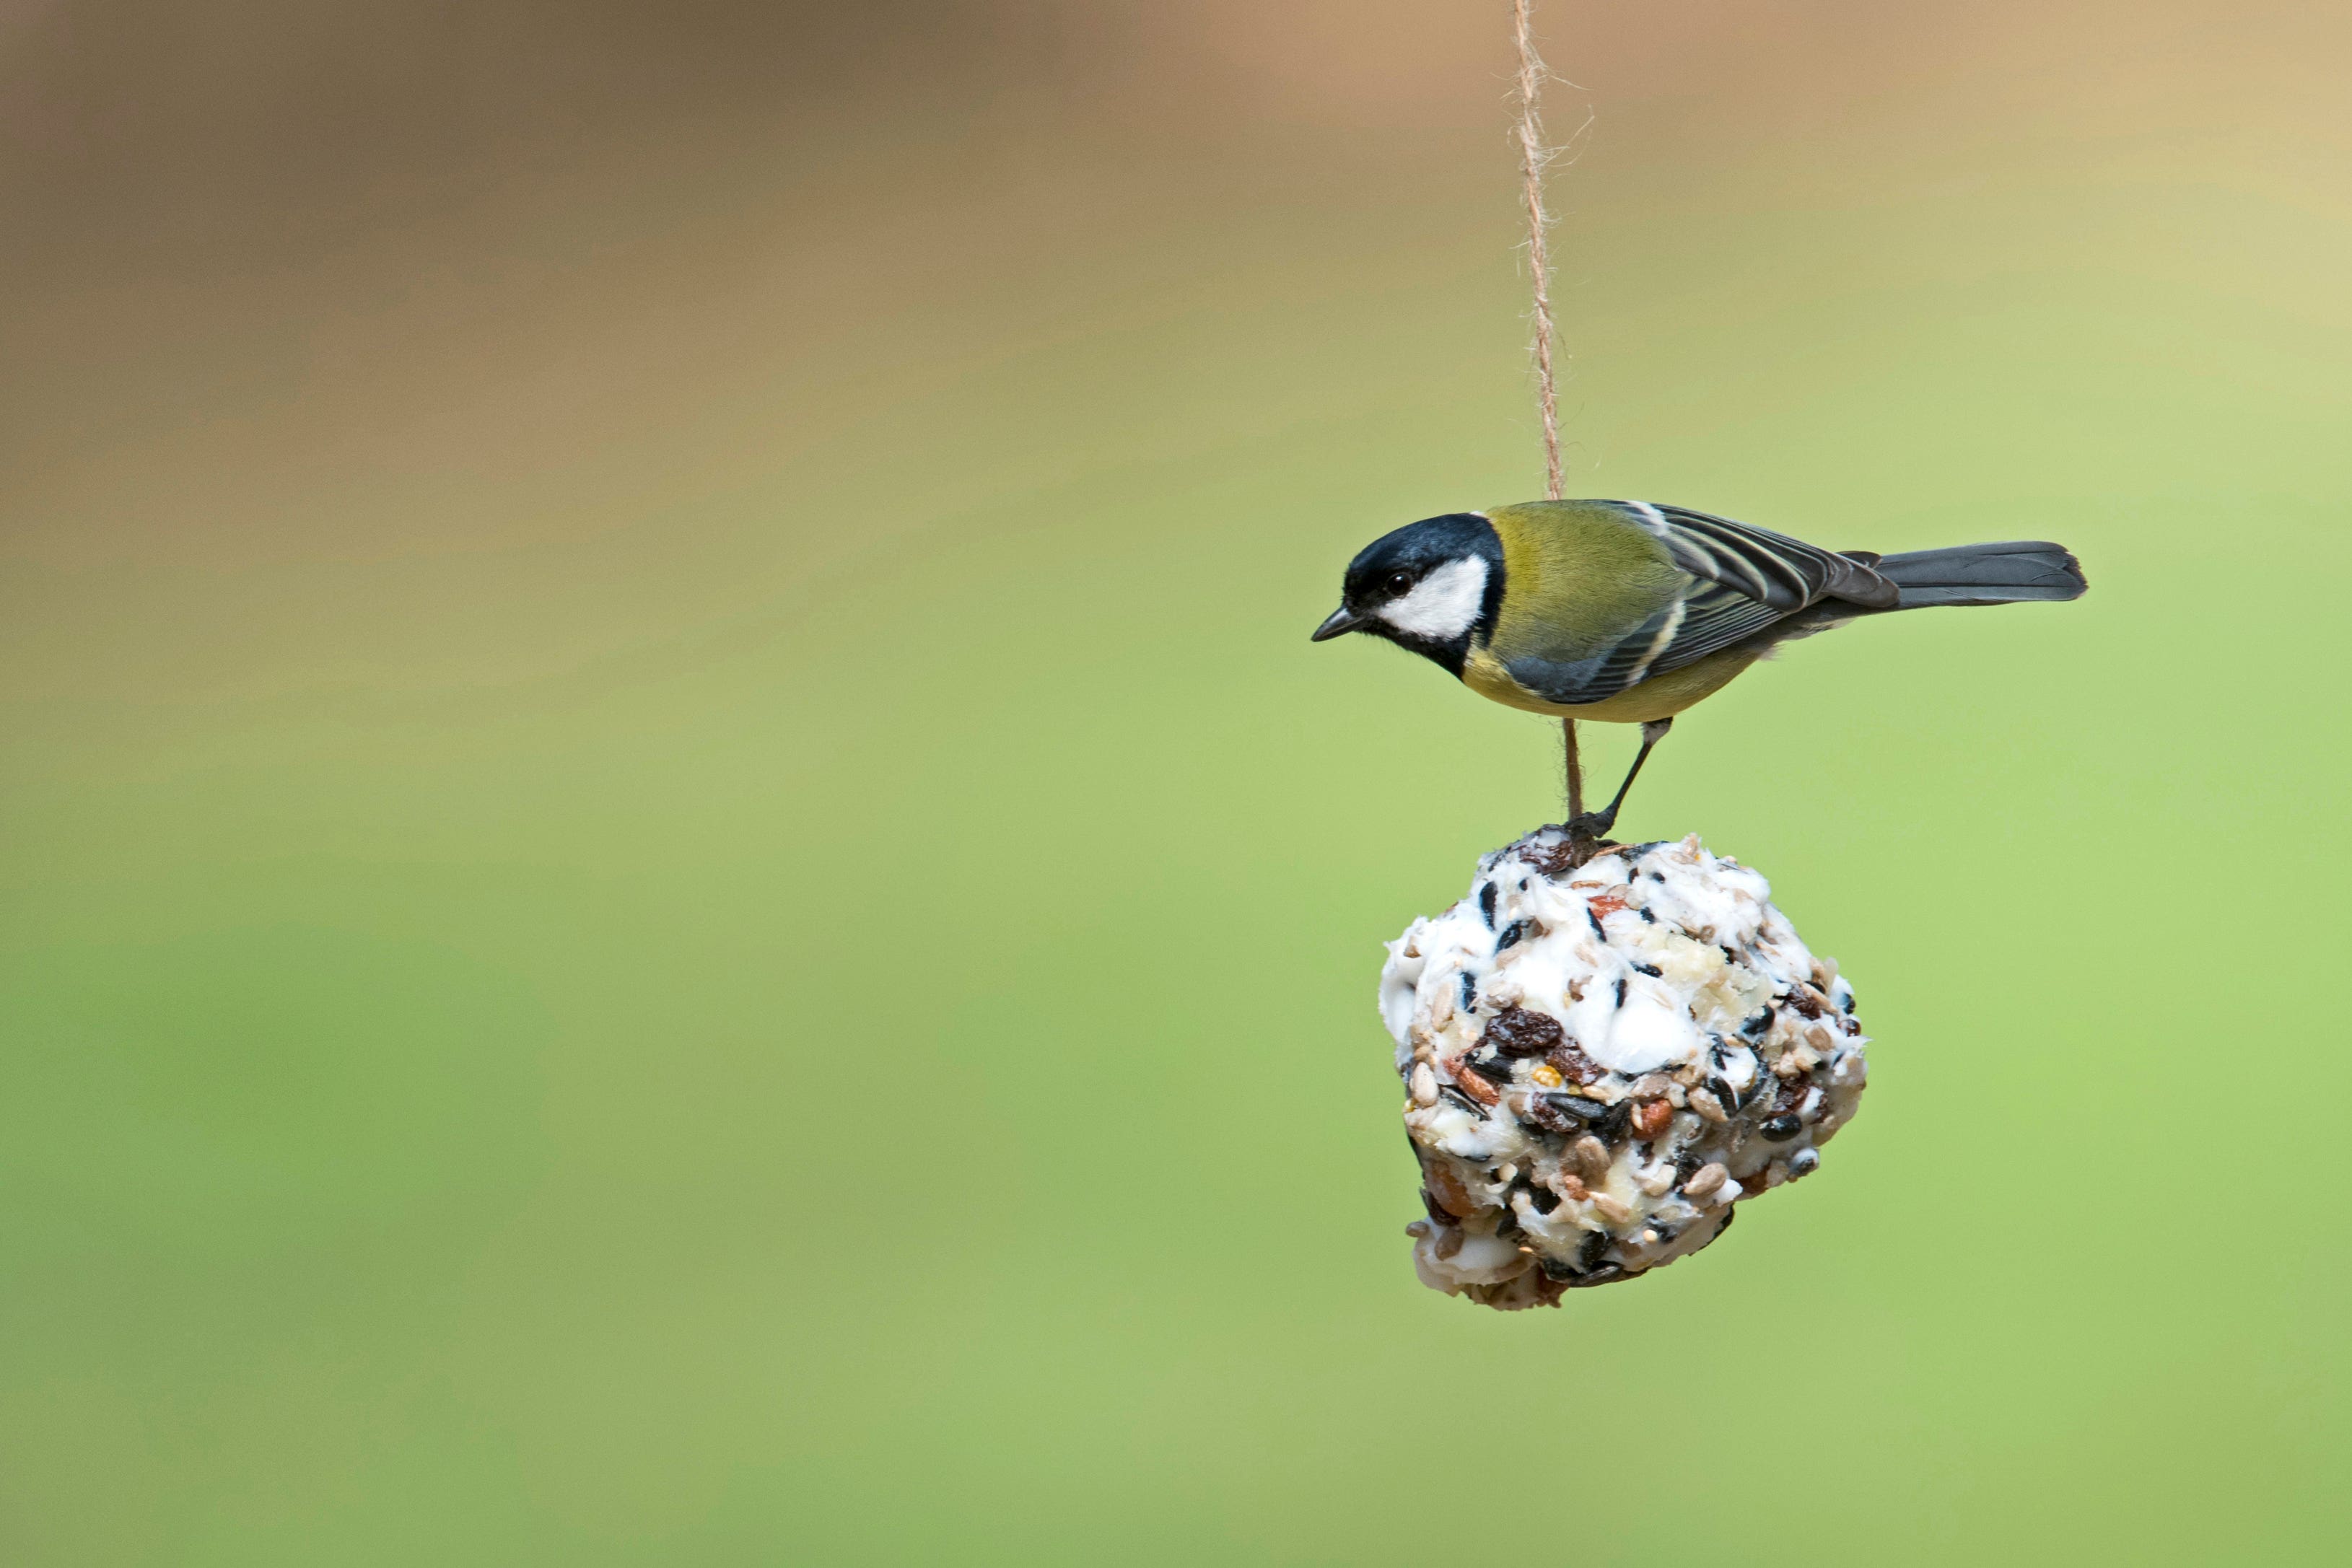 Some scraps from the Christmas table will go down a treat with birds (David Tipling RSPB Images/PA)